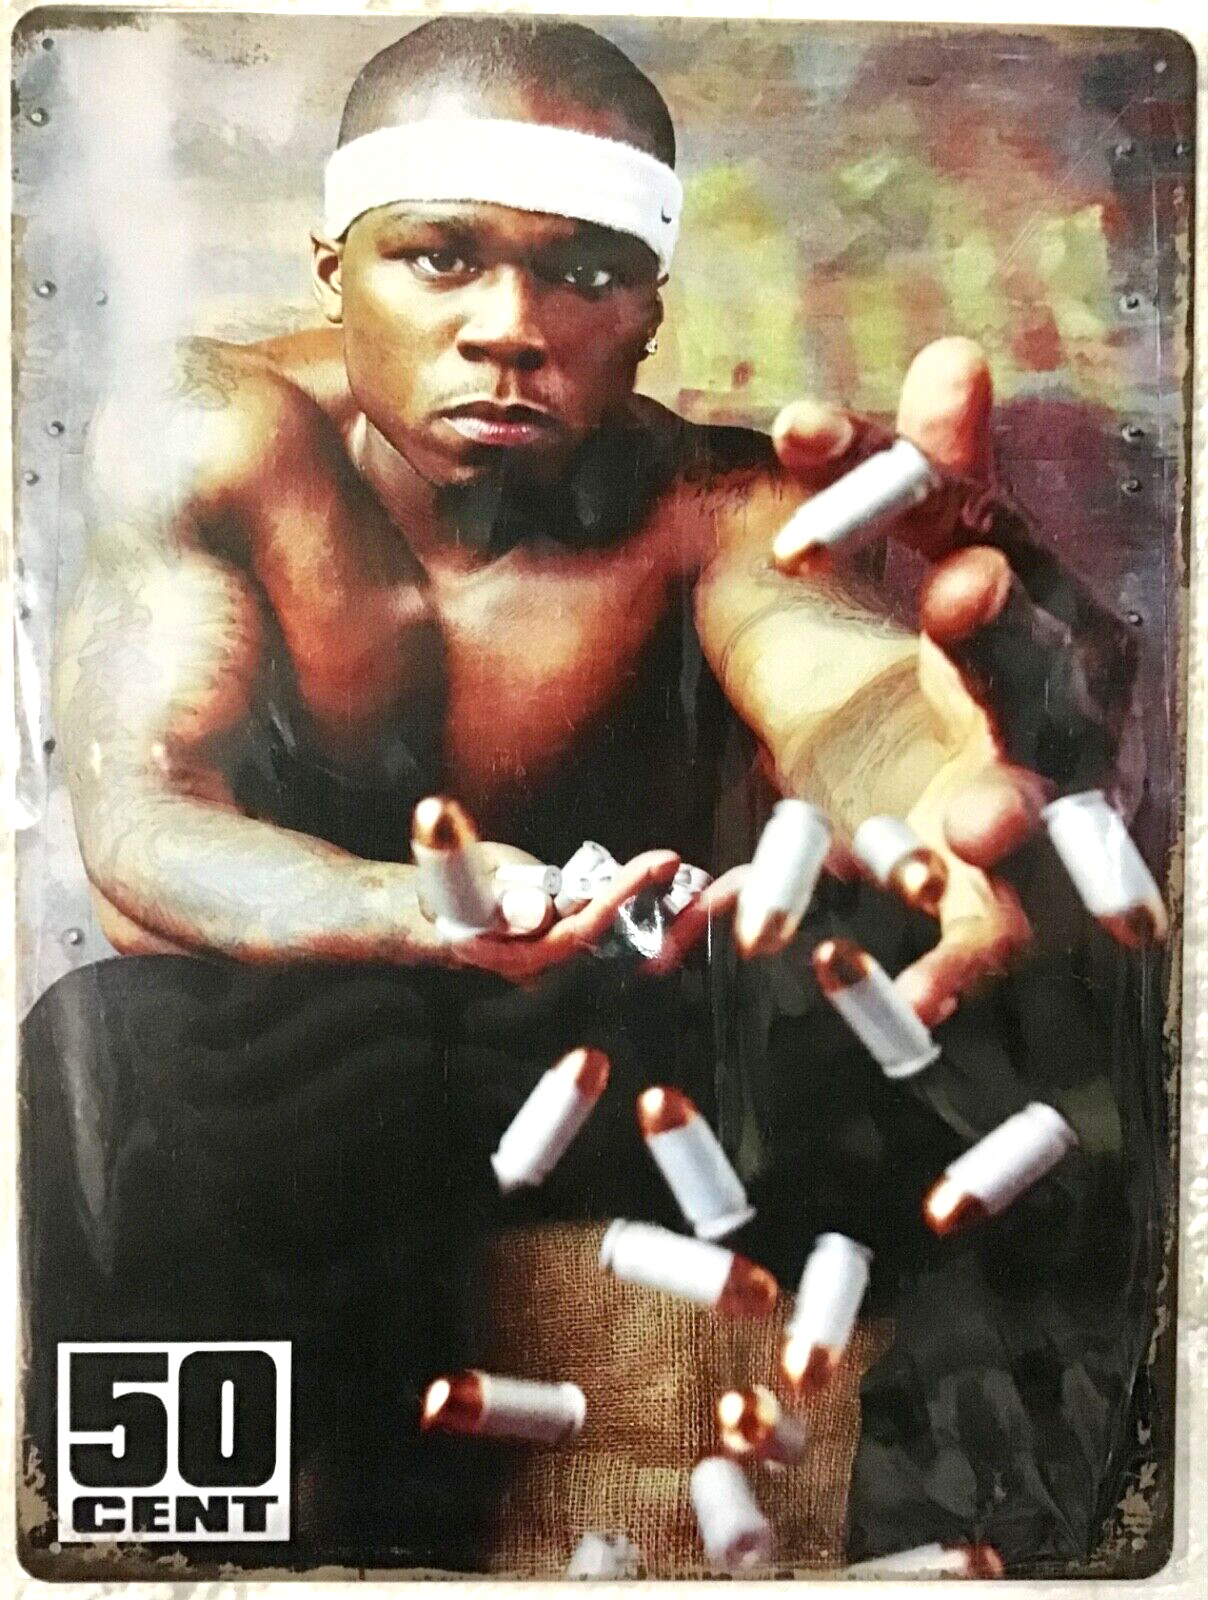 FREE SHIPPING BUY or make OFFER B4 it’s SOLD 50 Cent Rapper 12x16 TIN SIGN -A1